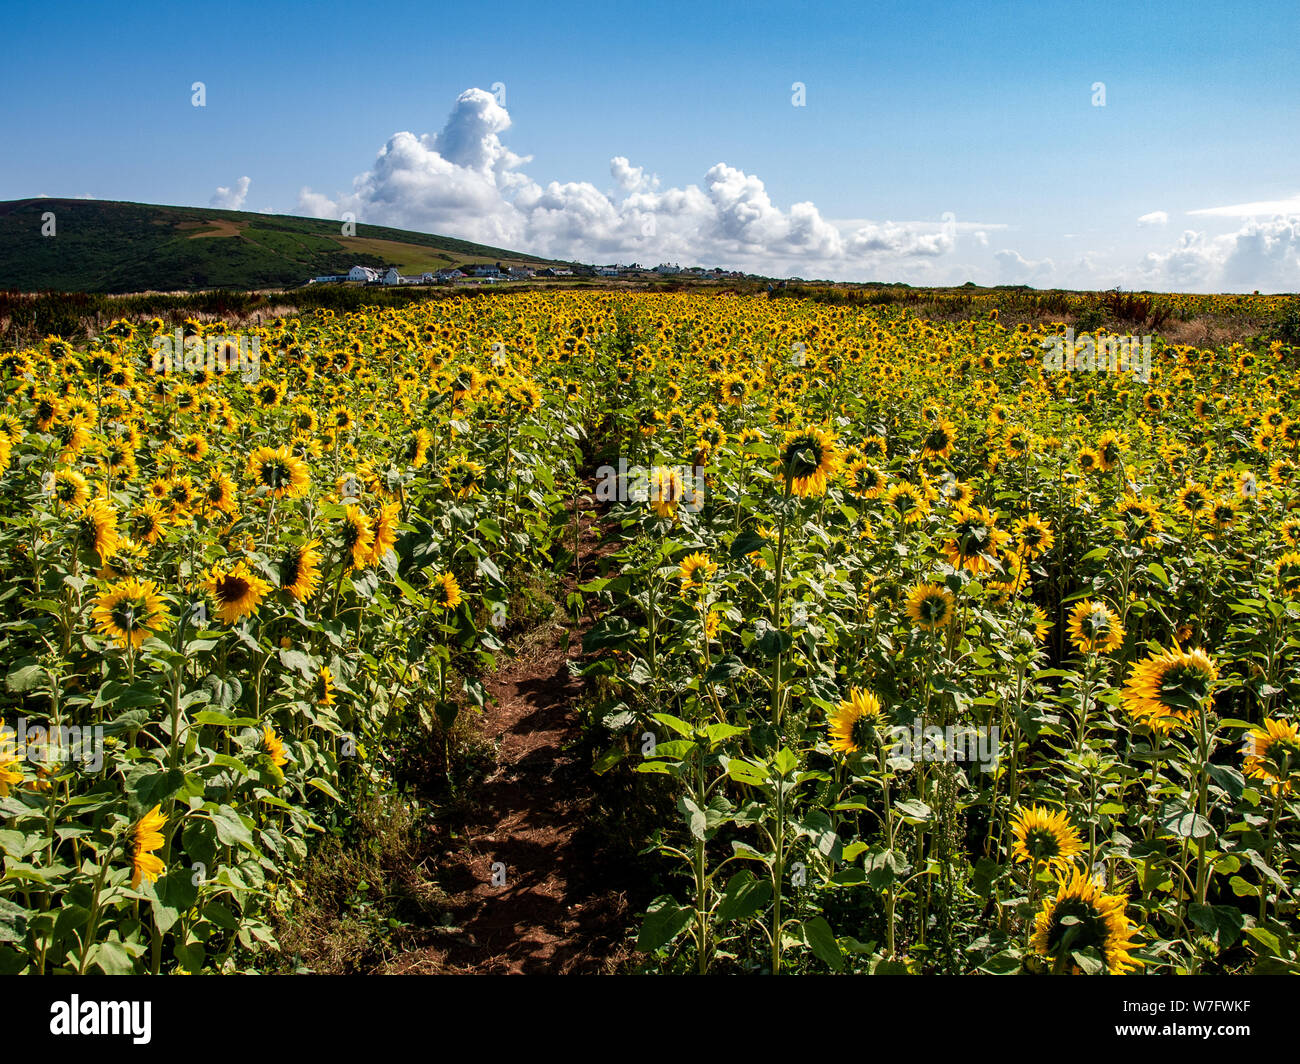 A field of sunflowers at Rhossili in August 2019. Looking back towards Rhossili down in the background. AONB, Gower, Wales, UK. Stock Photo